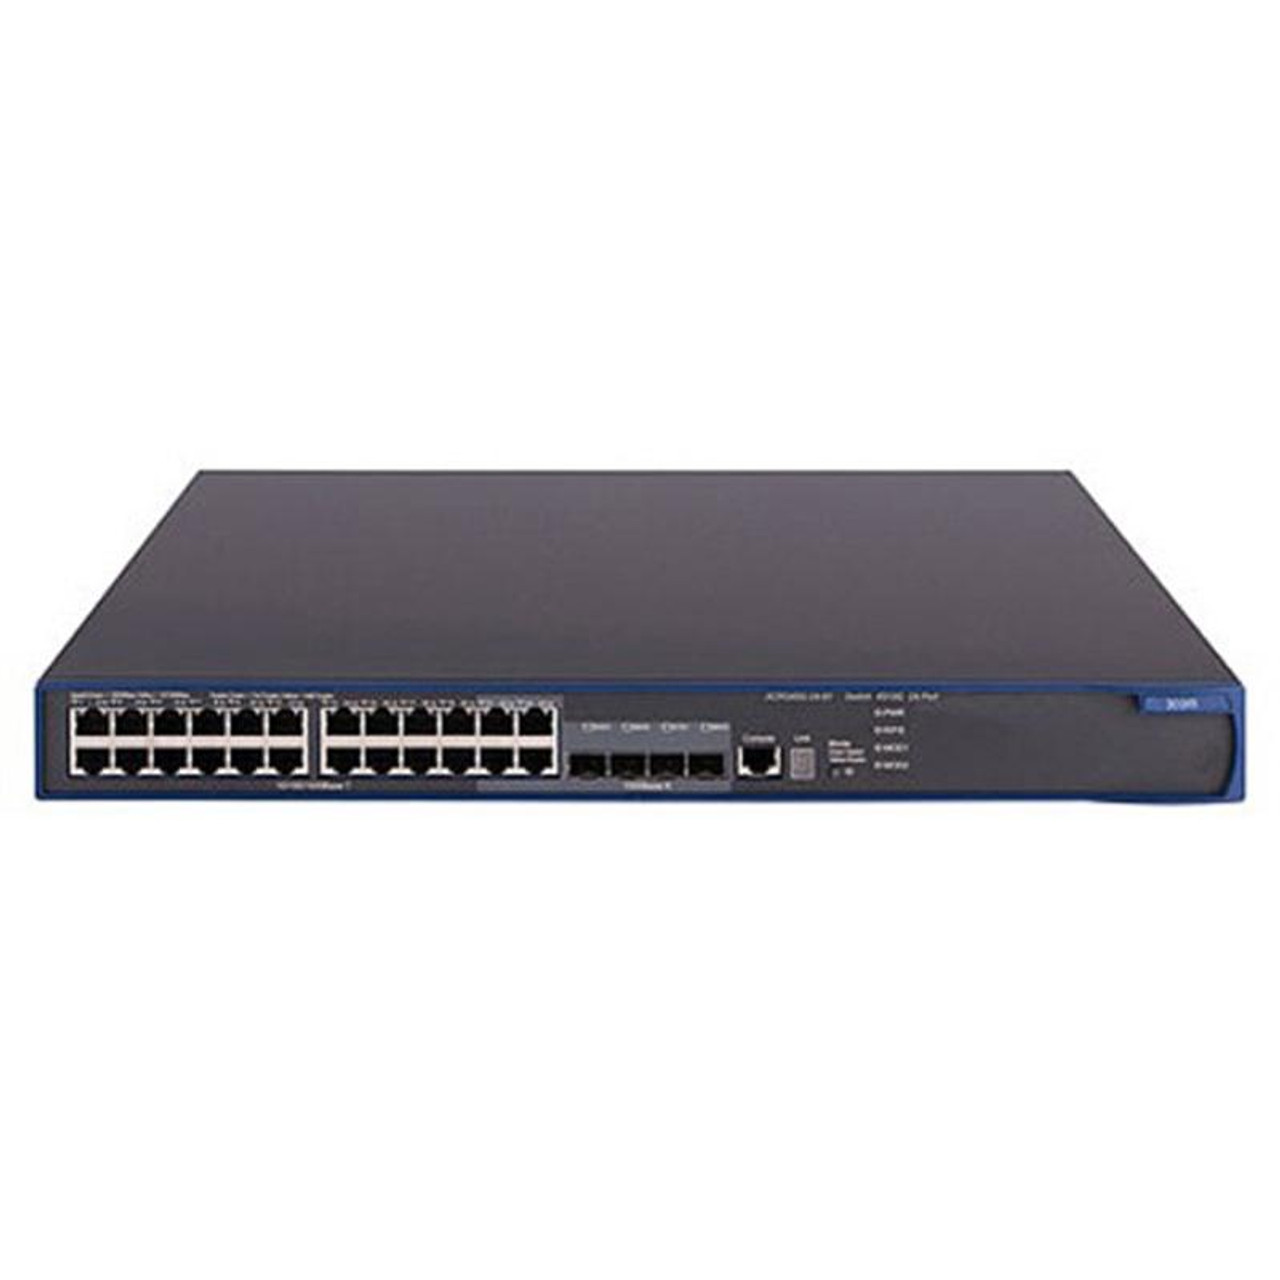 JF847A HP ProCurve E4510-24G 24-Ports Layer-3 Stackable Managed Switch + 4 Shared mini (GBIC) Ports (Refurbished)